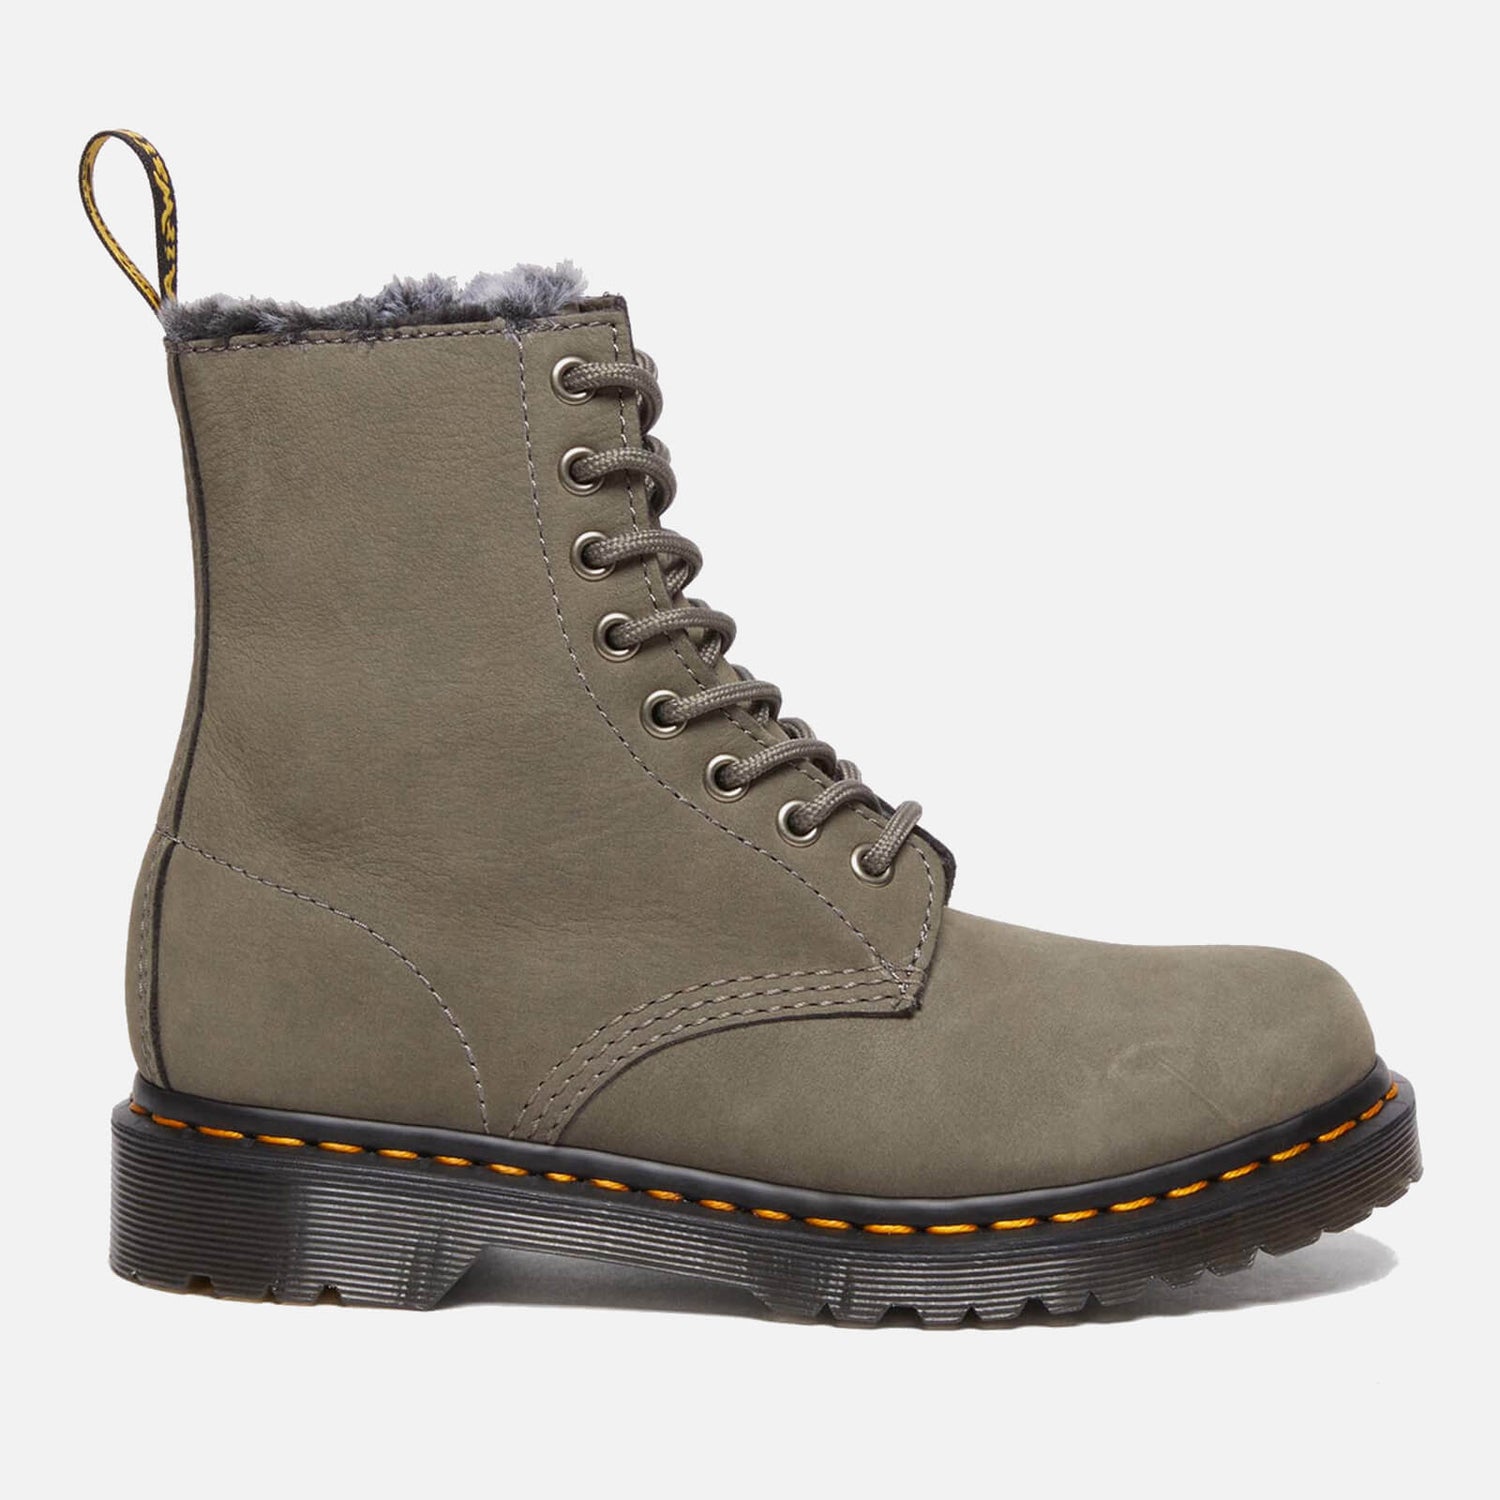 Dr. Martens Women's 1460 Serena Leather 8-eye Boots